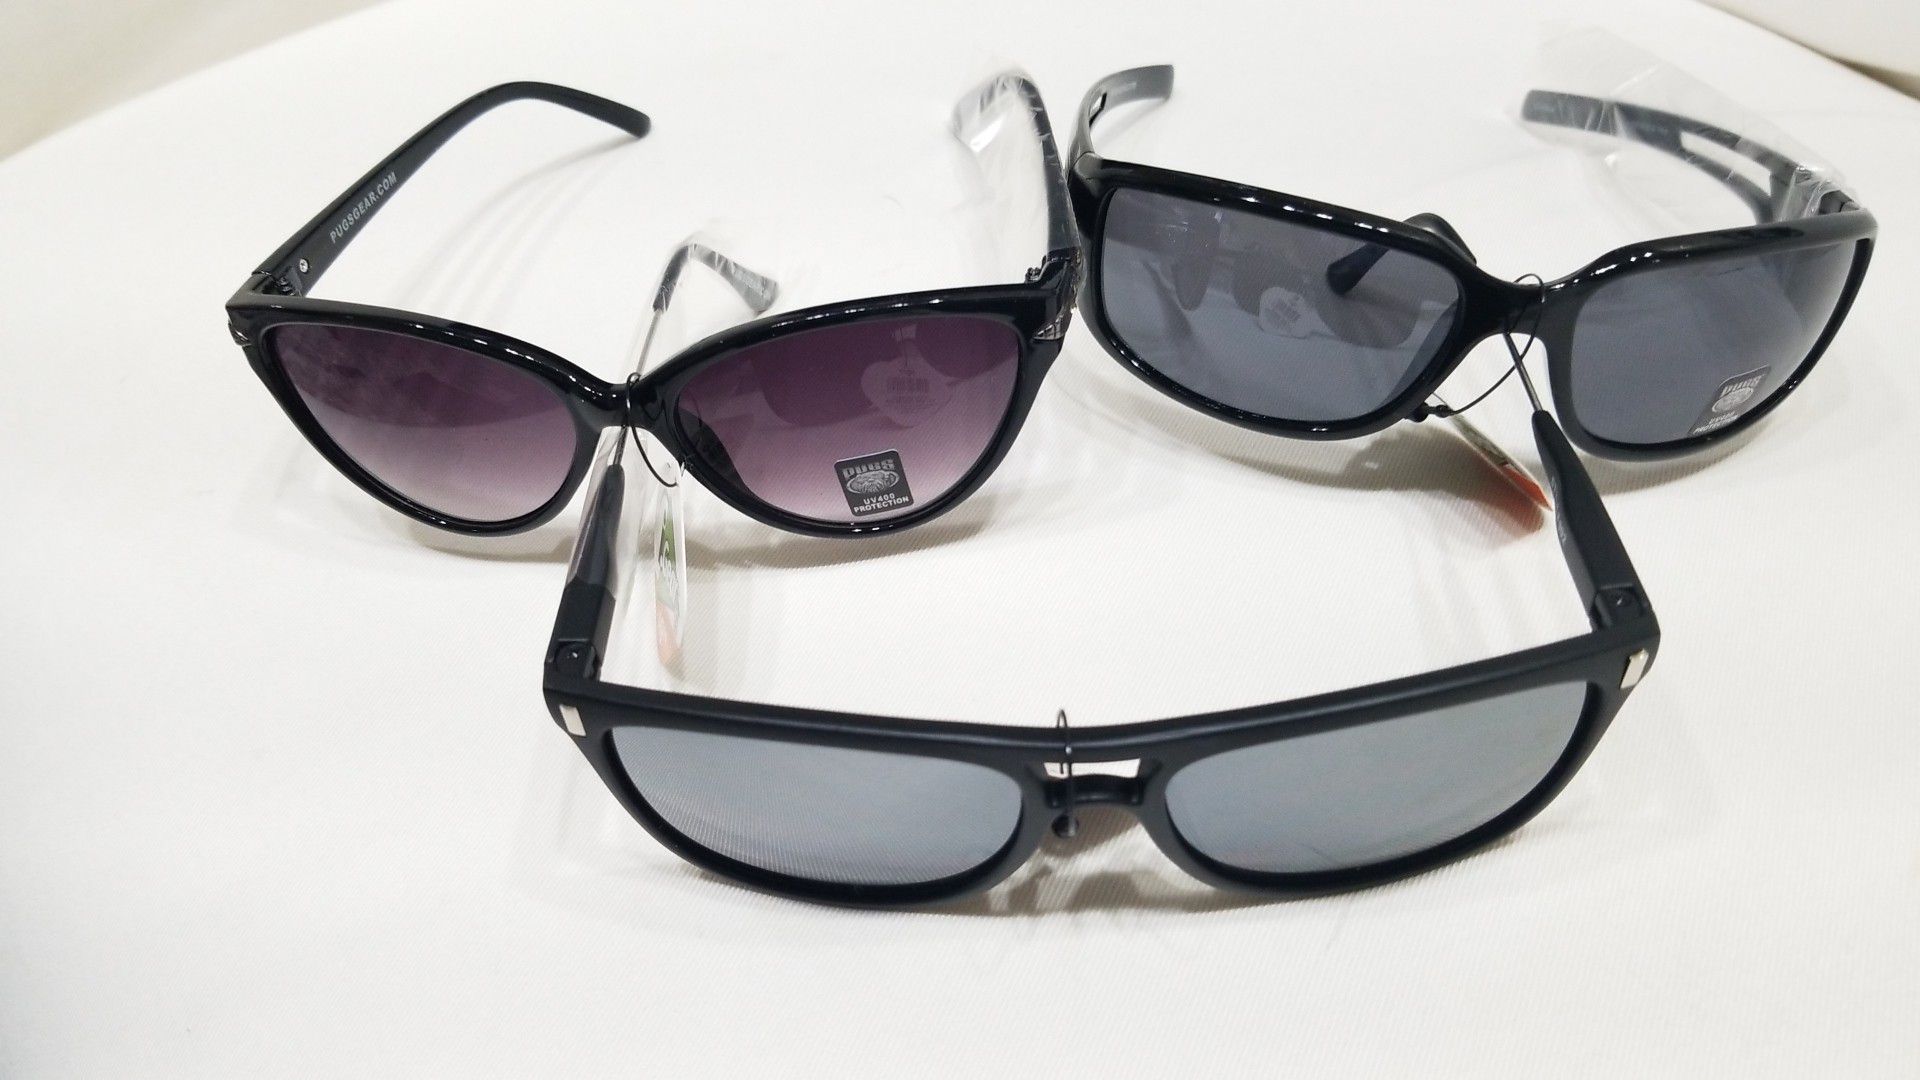 Sun glasses 3ct-24ct brand new resale ready or a bargain